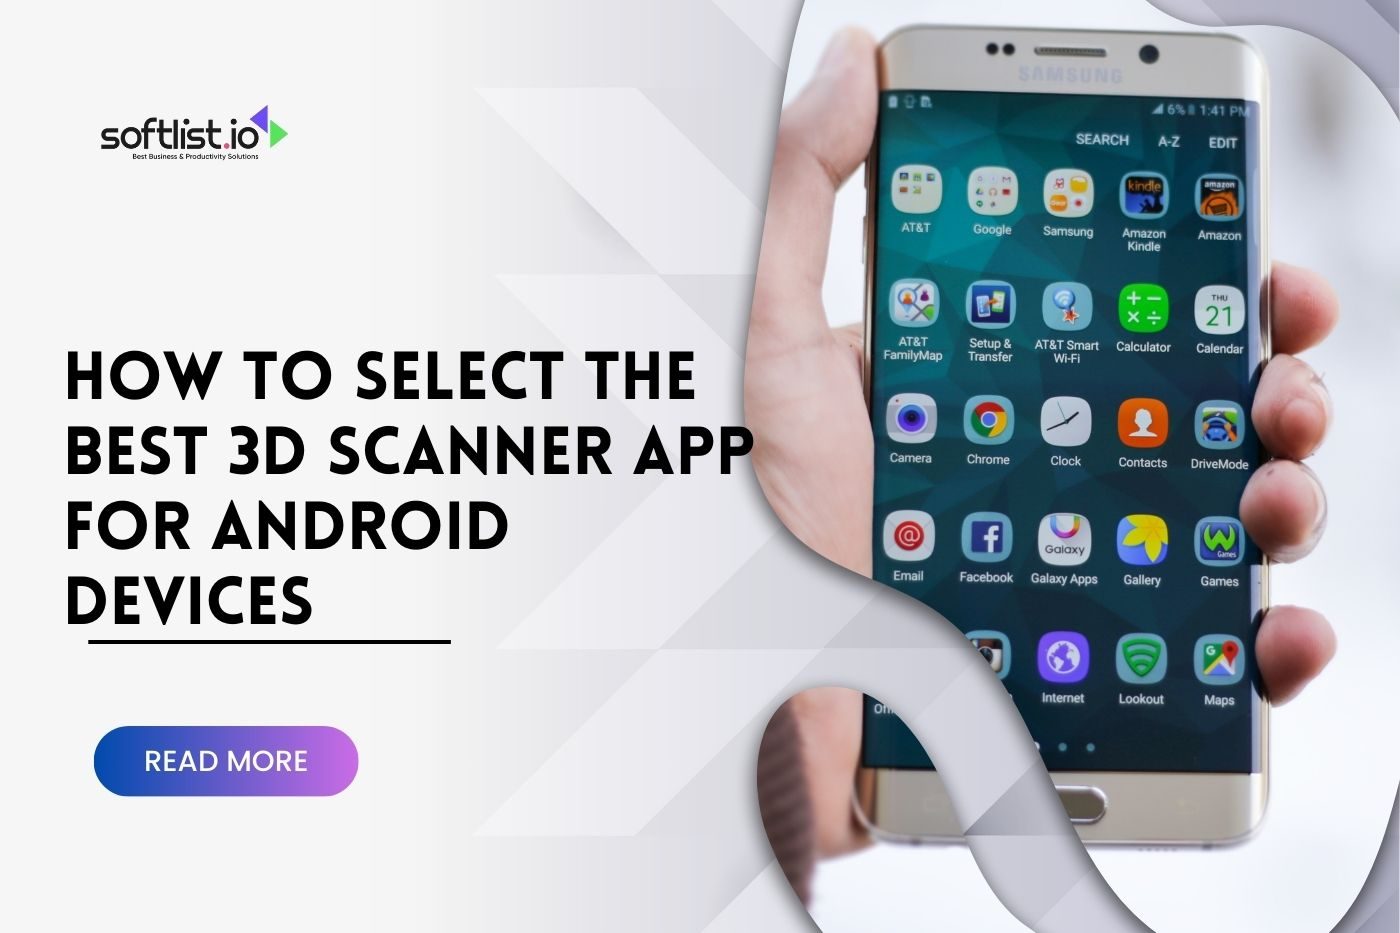 How to Select the Best 3D Scanner App for Android Devices